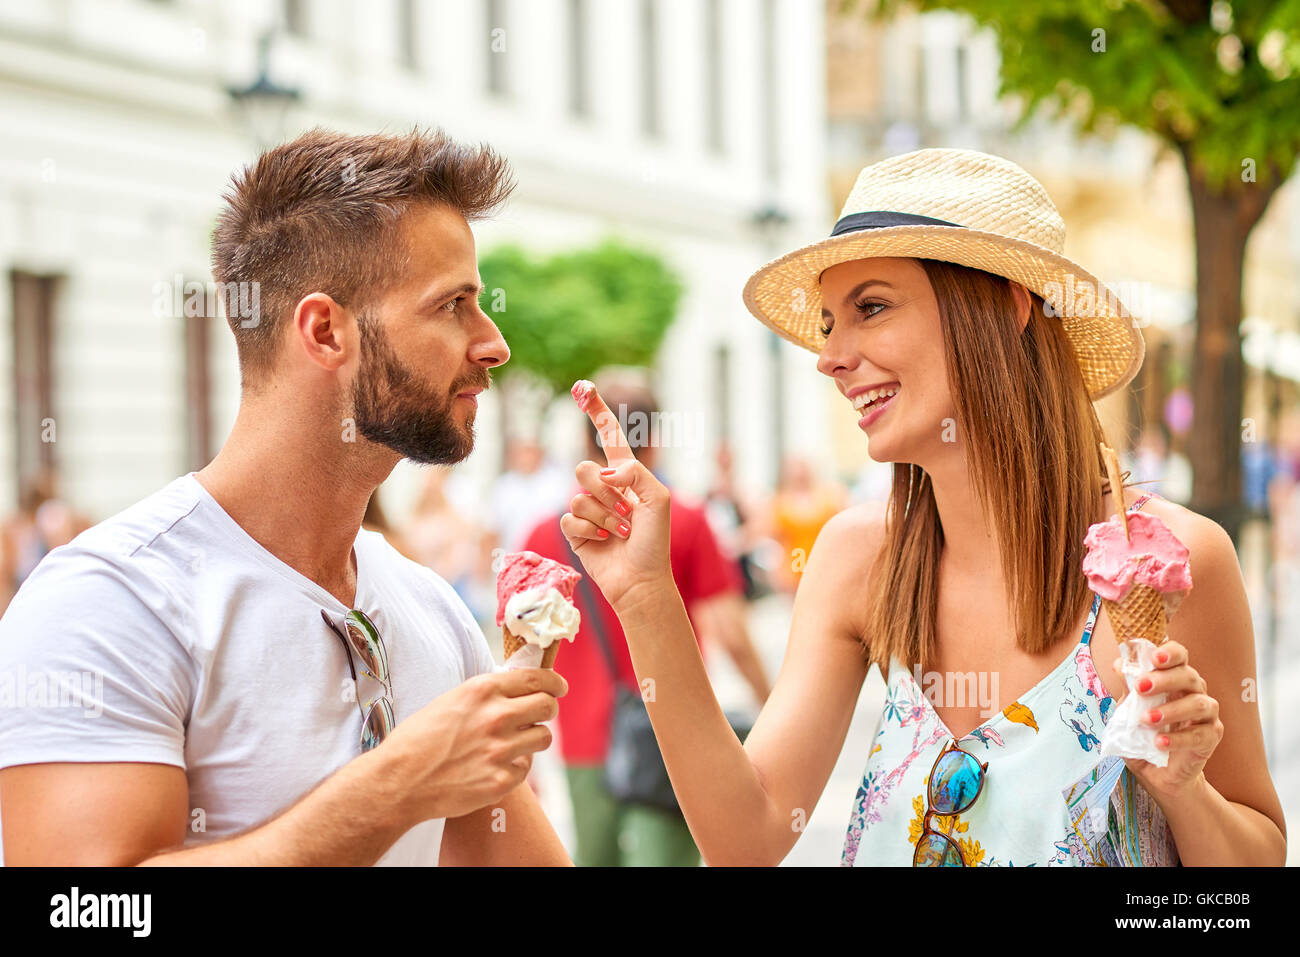 A beautiful young women is putting ice-cream with her finger on her boyfriend’s nose on the street of Budapest, Hungary. Stock Photo